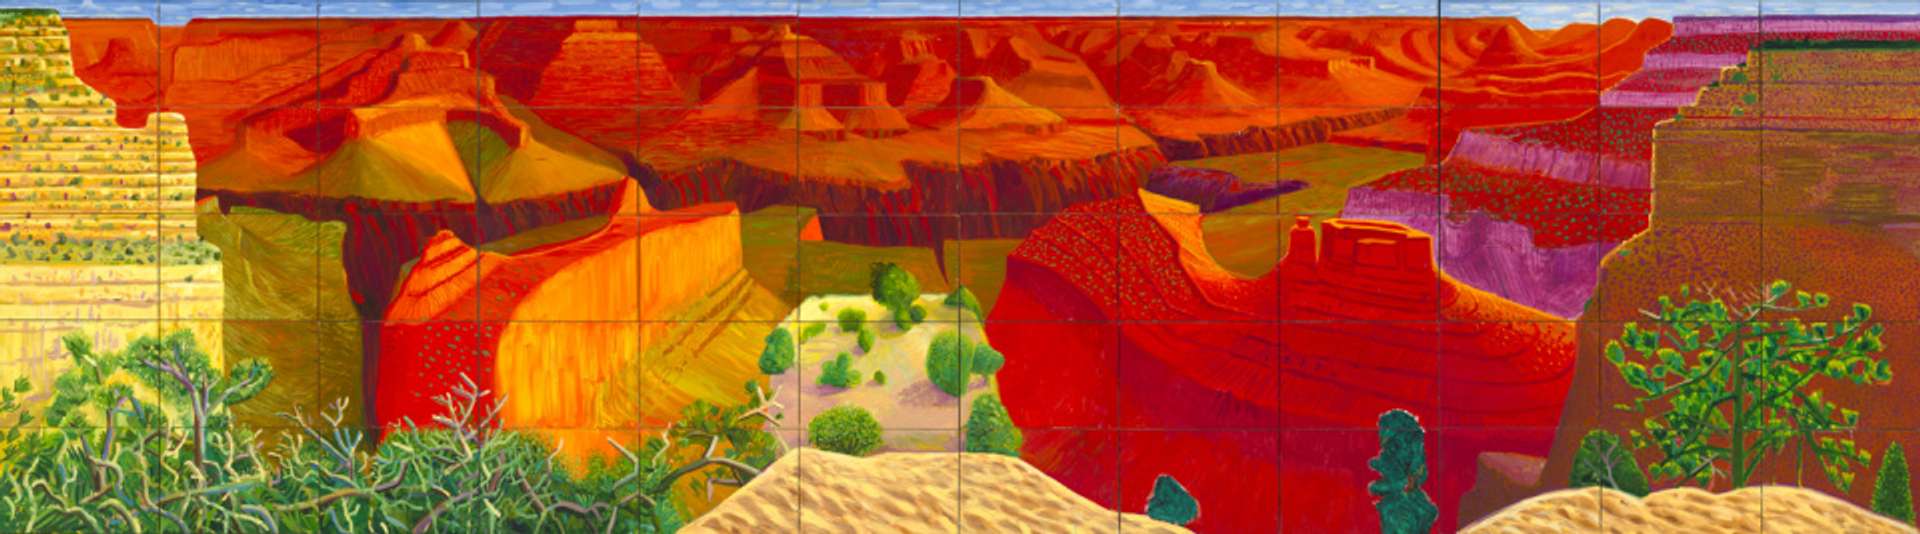 David Hockney's Artistic Journey: From Yorkshire to Los Angeles